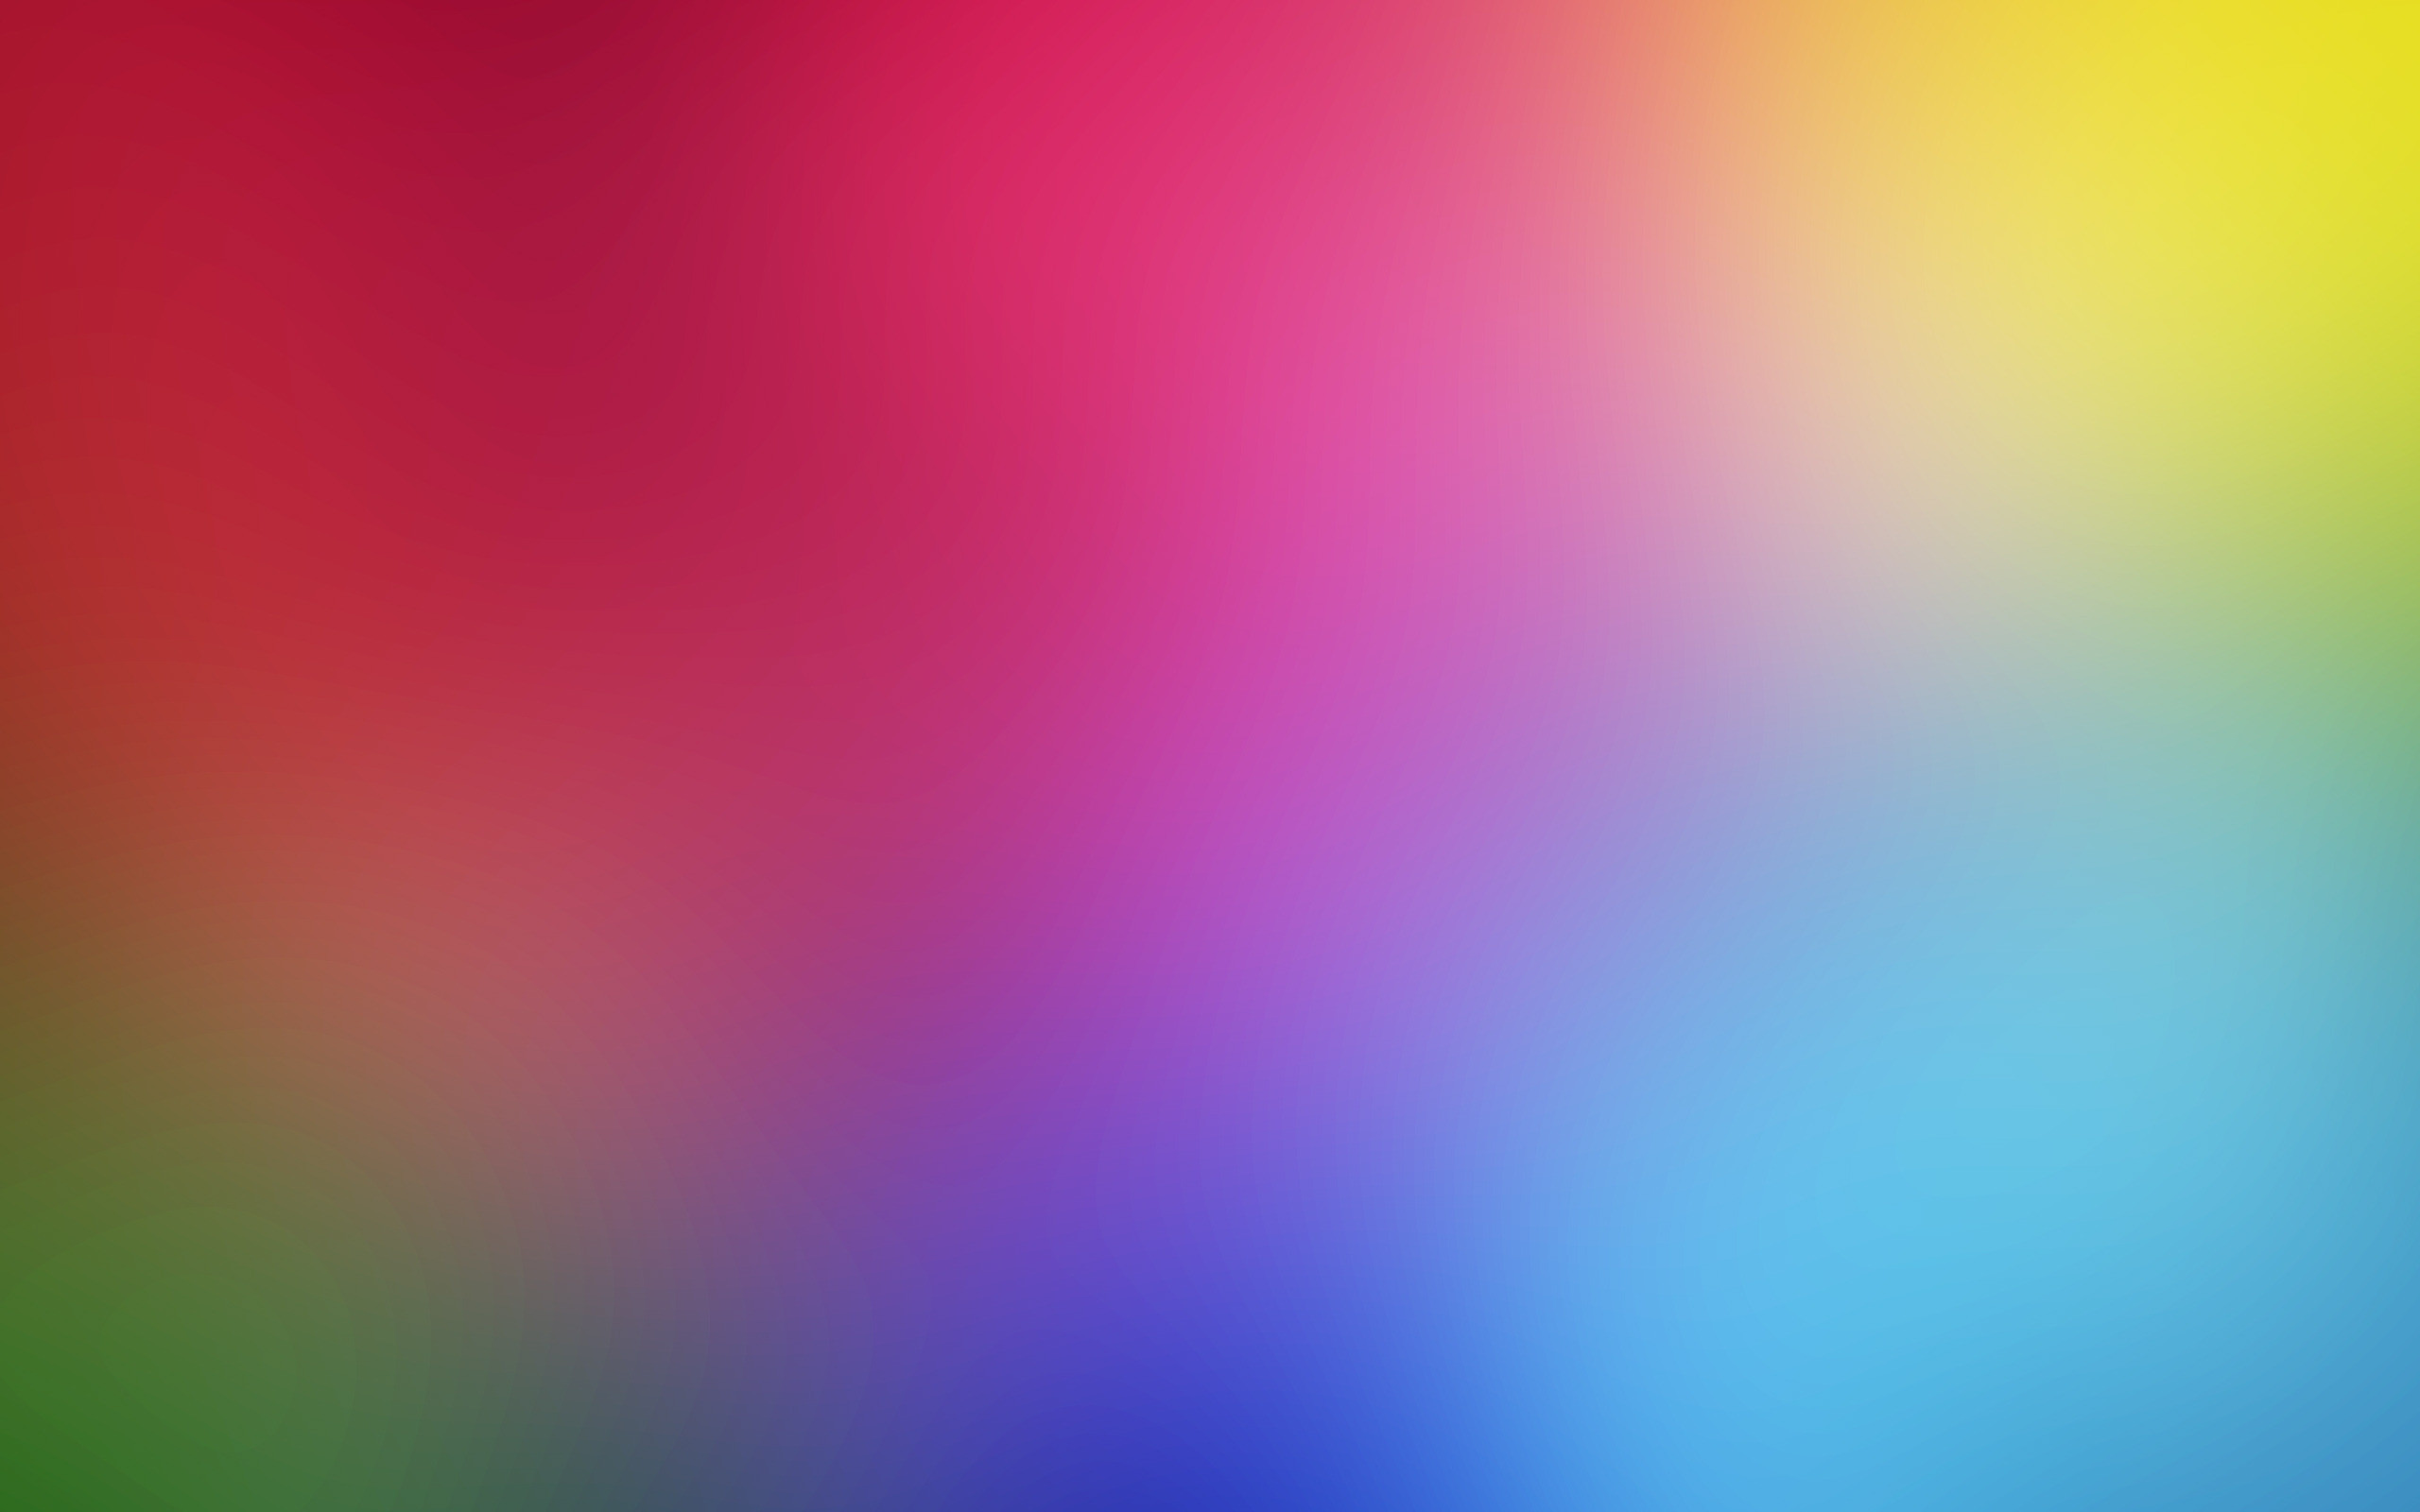 colour wallpaper download,blue,green,red,purple,colorfulness